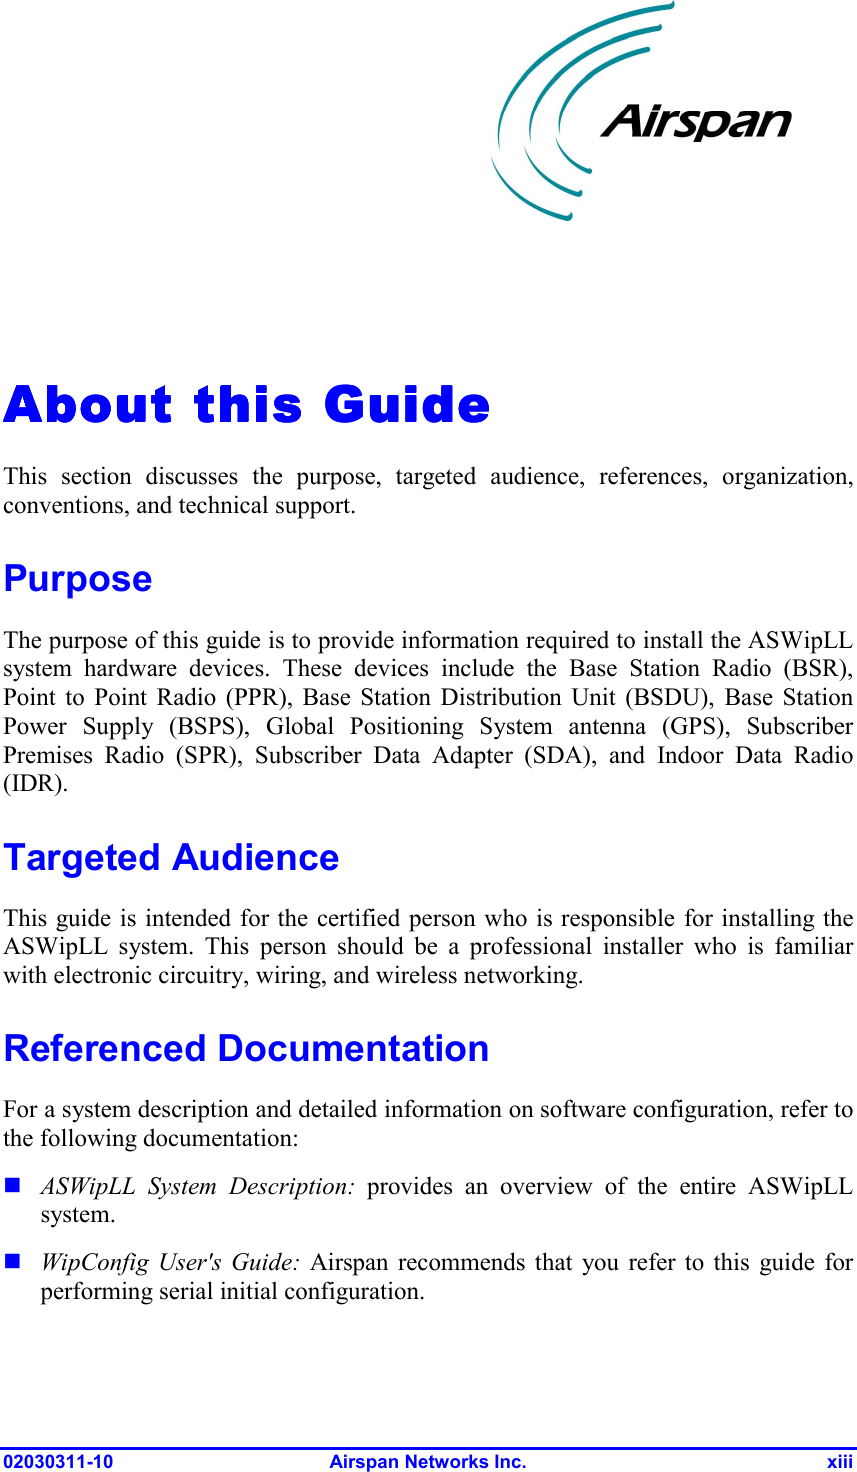  02030311-10 Airspan Networks Inc.  xiii About this About this About this About this GuideGuideGuideGuide    This section discusses the purpose, targeted audience, references, organization, conventions, and technical support.  Purpose The purpose of this guide is to provide information required to install the ASWipLL system hardware devices. These devices include the Base Station Radio (BSR), Point to Point Radio (PPR), Base Station Distribution Unit (BSDU), Base Station Power Supply (BSPS), Global Positioning System antenna (GPS), Subscriber Premises Radio (SPR), Subscriber Data Adapter (SDA), and Indoor Data Radio (IDR). Targeted Audience This guide is intended for the certified person who is responsible for installing the ASWipLL system. This person should be a professional installer who is familiar with electronic circuitry, wiring, and wireless networking. Referenced Documentation For a system description and detailed information on software configuration, refer to the following documentation:  ASWipLL System Description: provides an overview of the entire ASWipLL system.  WipConfig User&apos;s Guide: Airspan recommends that you refer to this guide for performing serial initial configuration.  